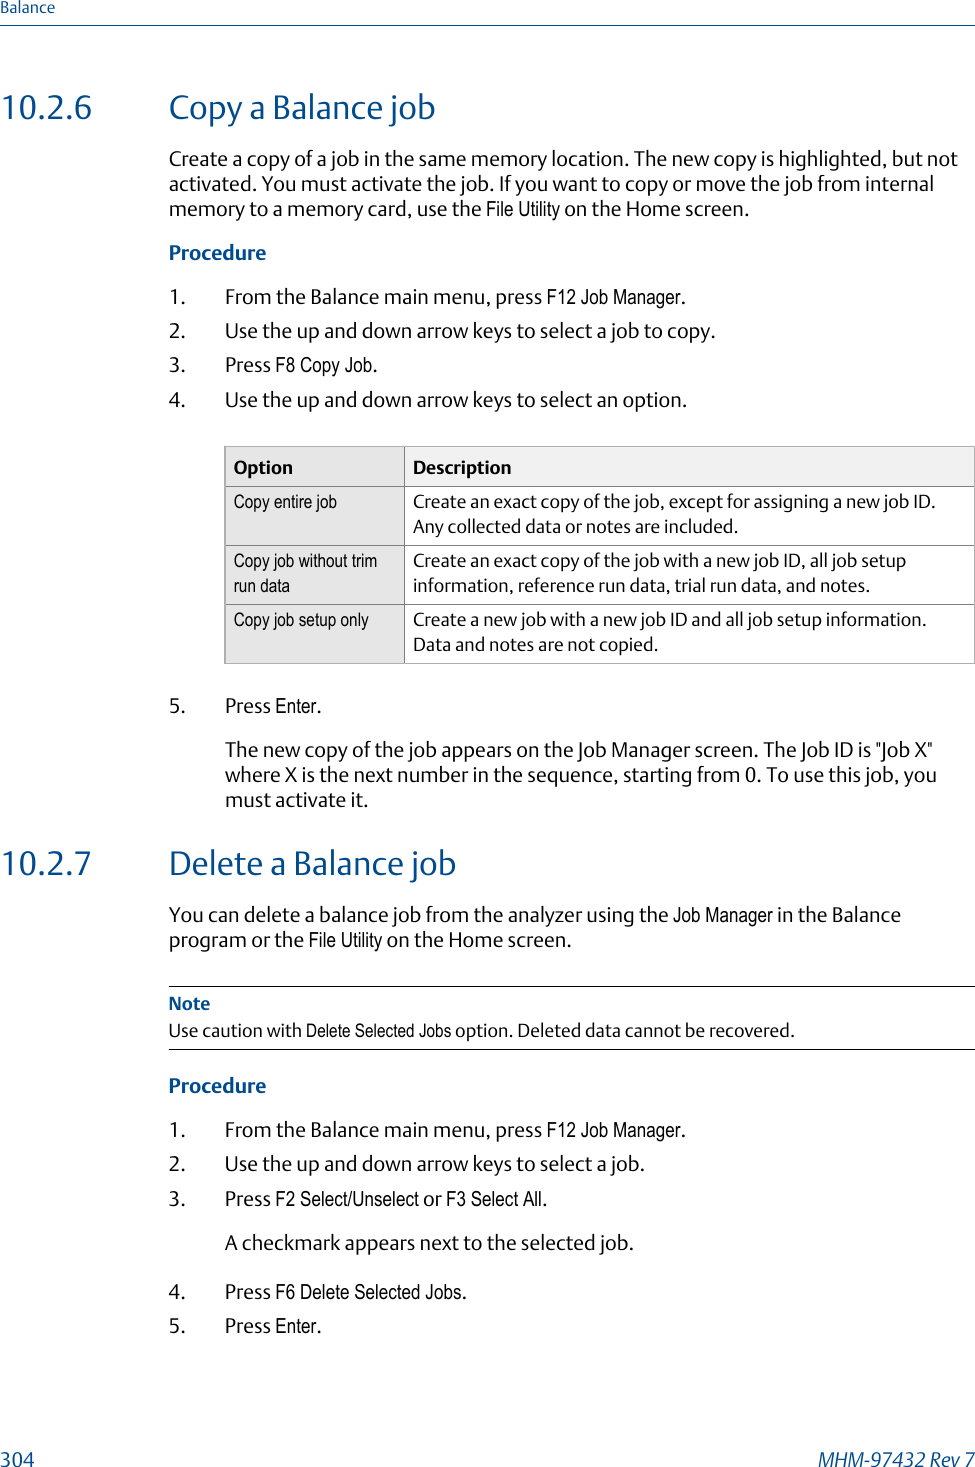 10.2.6 Copy a Balance jobCreate a copy of a job in the same memory location. The new copy is highlighted, but notactivated. You must activate the job. If you want to copy or move the job from internalmemory to a memory card, use the File Utility on the Home screen.Procedure1. From the Balance main menu, press F12 Job Manager.2. Use the up and down arrow keys to select a job to copy.3. Press F8 Copy Job.4. Use the up and down arrow keys to select an option.Option DescriptionCopy entire job Create an exact copy of the job, except for assigning a new job ID.Any collected data or notes are included.Copy job without trimrun dataCreate an exact copy of the job with a new job ID, all job setupinformation, reference run data, trial run data, and notes.Copy job setup only Create a new job with a new job ID and all job setup information.Data and notes are not copied.5. Press Enter.The new copy of the job appears on the Job Manager screen. The Job ID is &quot;Job X&quot;where X is the next number in the sequence, starting from 0. To use this job, youmust activate it.10.2.7 Delete a Balance jobYou can delete a balance job from the analyzer using the Job Manager in the Balanceprogram or the File Utility on the Home screen.NoteUse caution with Delete Selected Jobs option. Deleted data cannot be recovered.Procedure1. From the Balance main menu, press F12 Job Manager.2. Use the up and down arrow keys to select a job.3. Press F2 Select/Unselect or F3 Select All.A checkmark appears next to the selected job.4. Press F6 Delete Selected Jobs.5. Press Enter.Balance304 MHM-97432 Rev 7